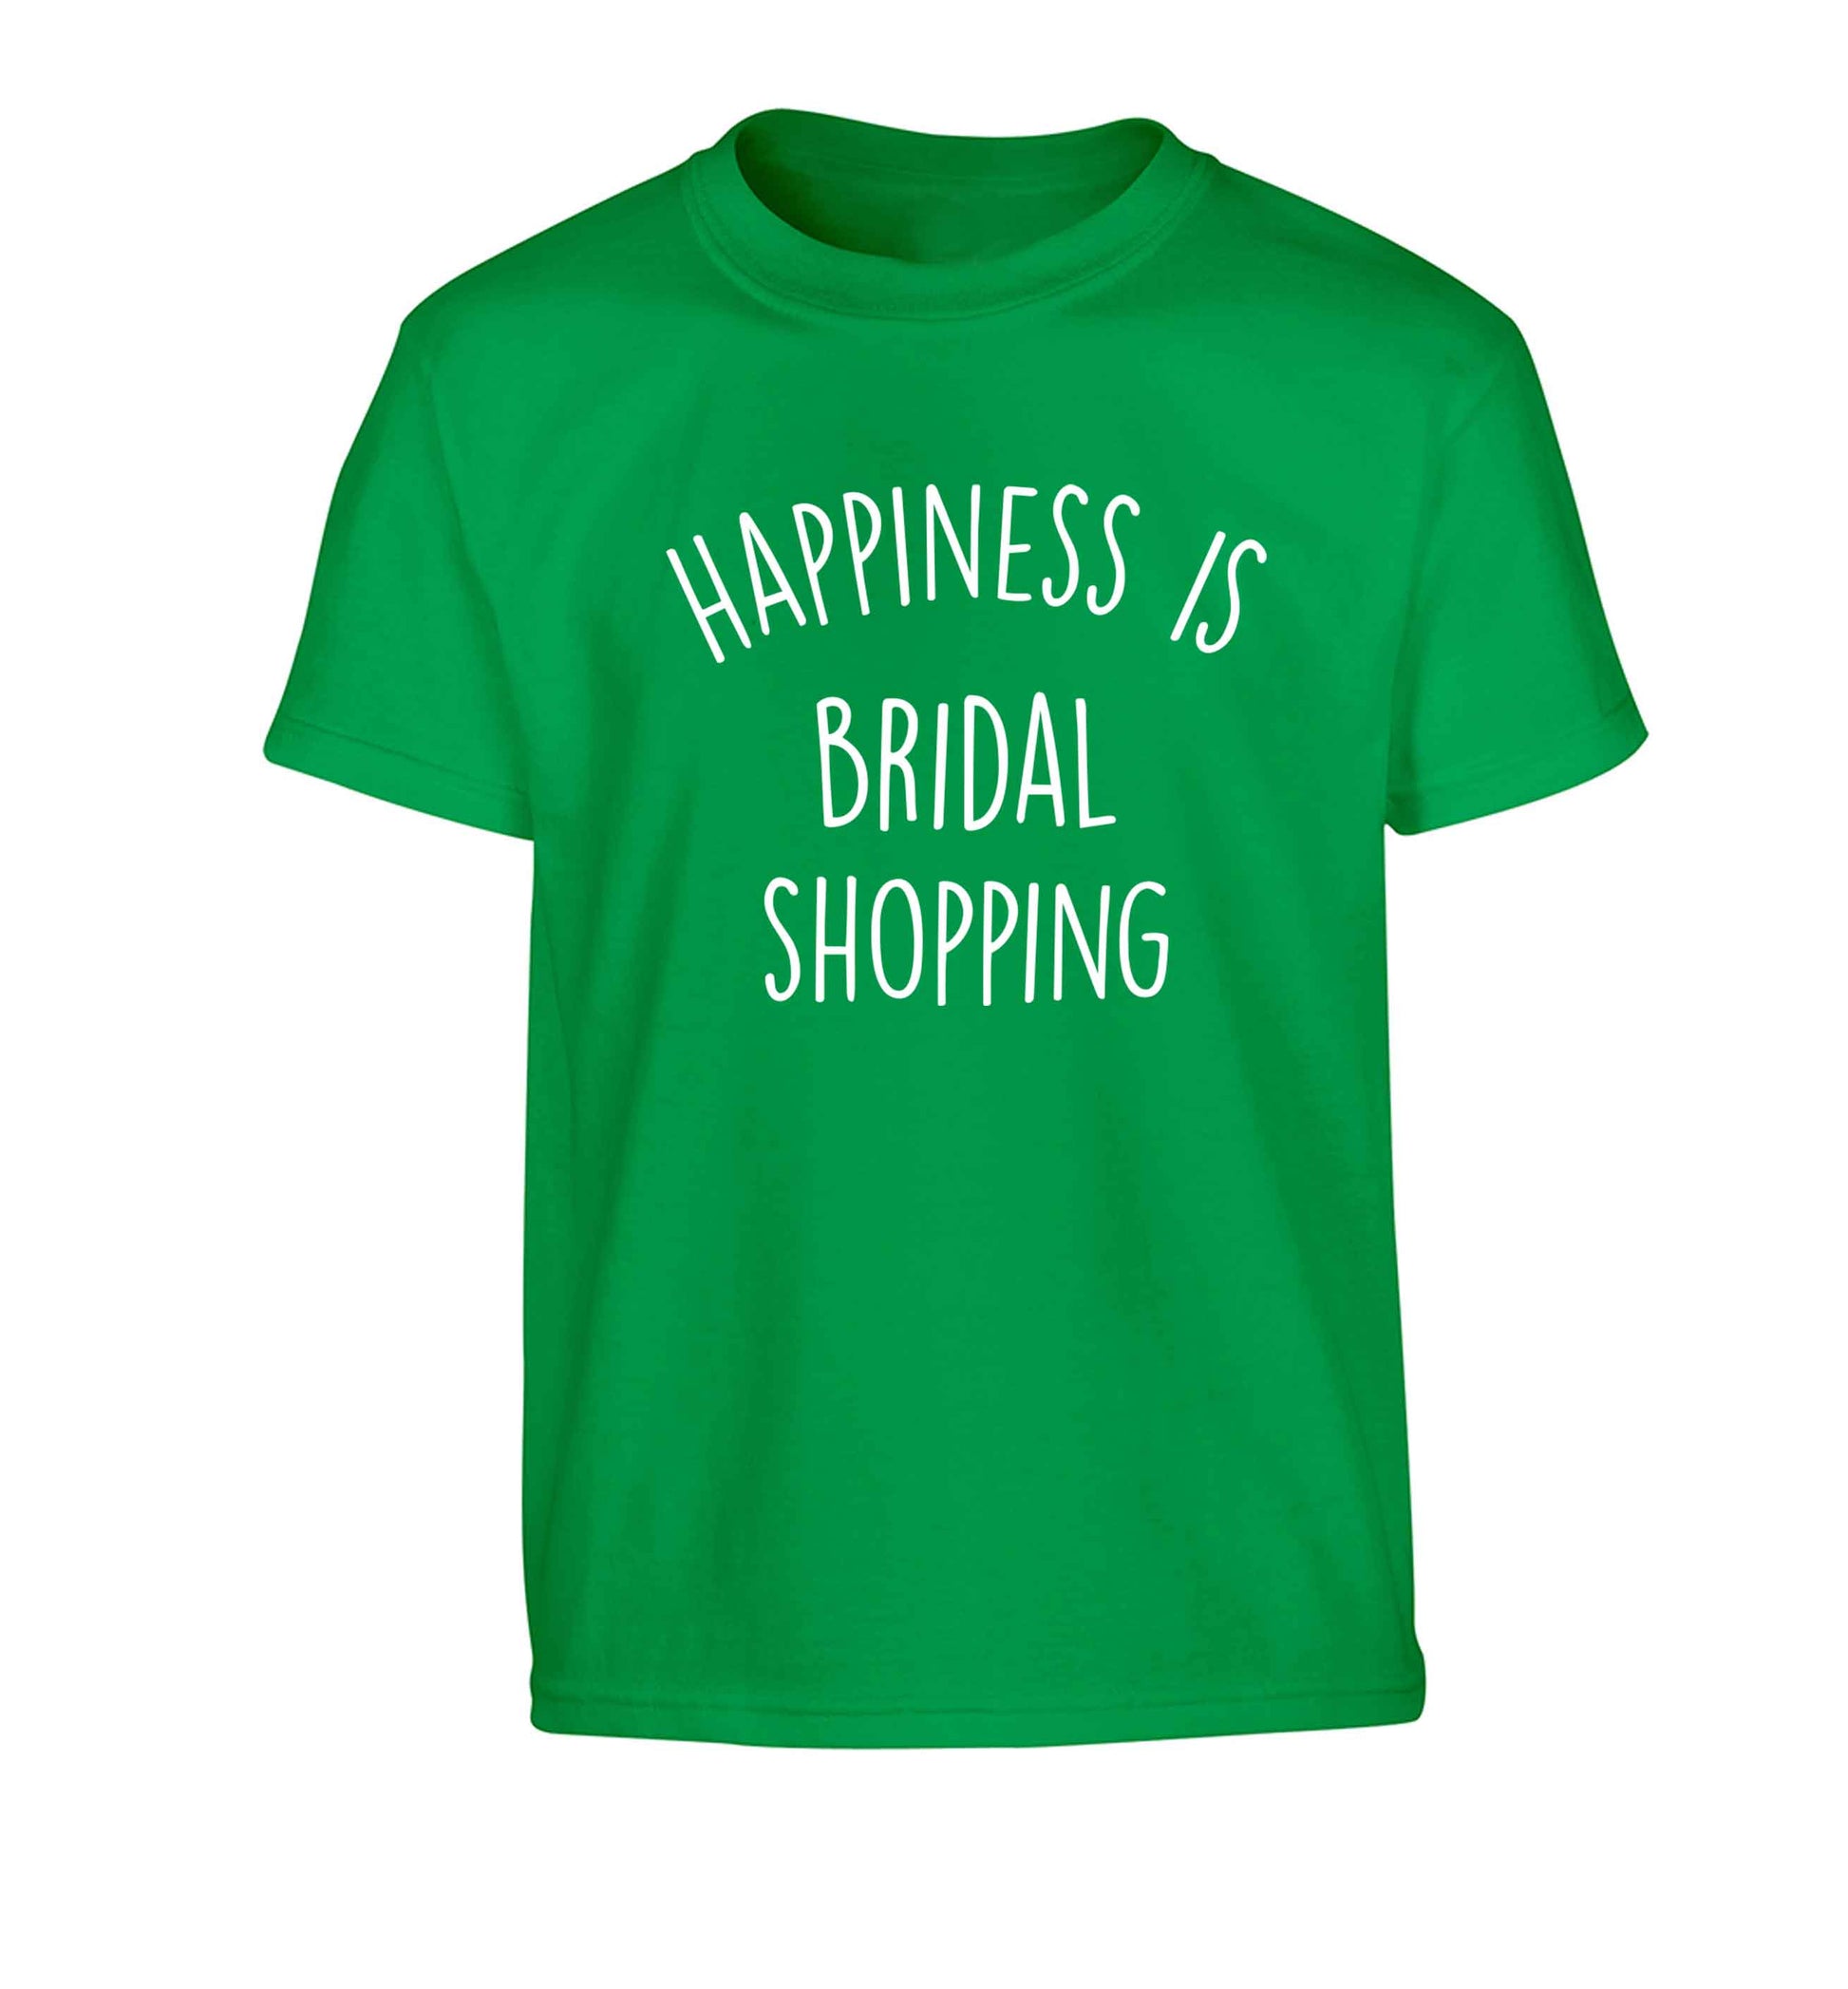 Happiness is bridal shopping Children's green Tshirt 12-13 Years